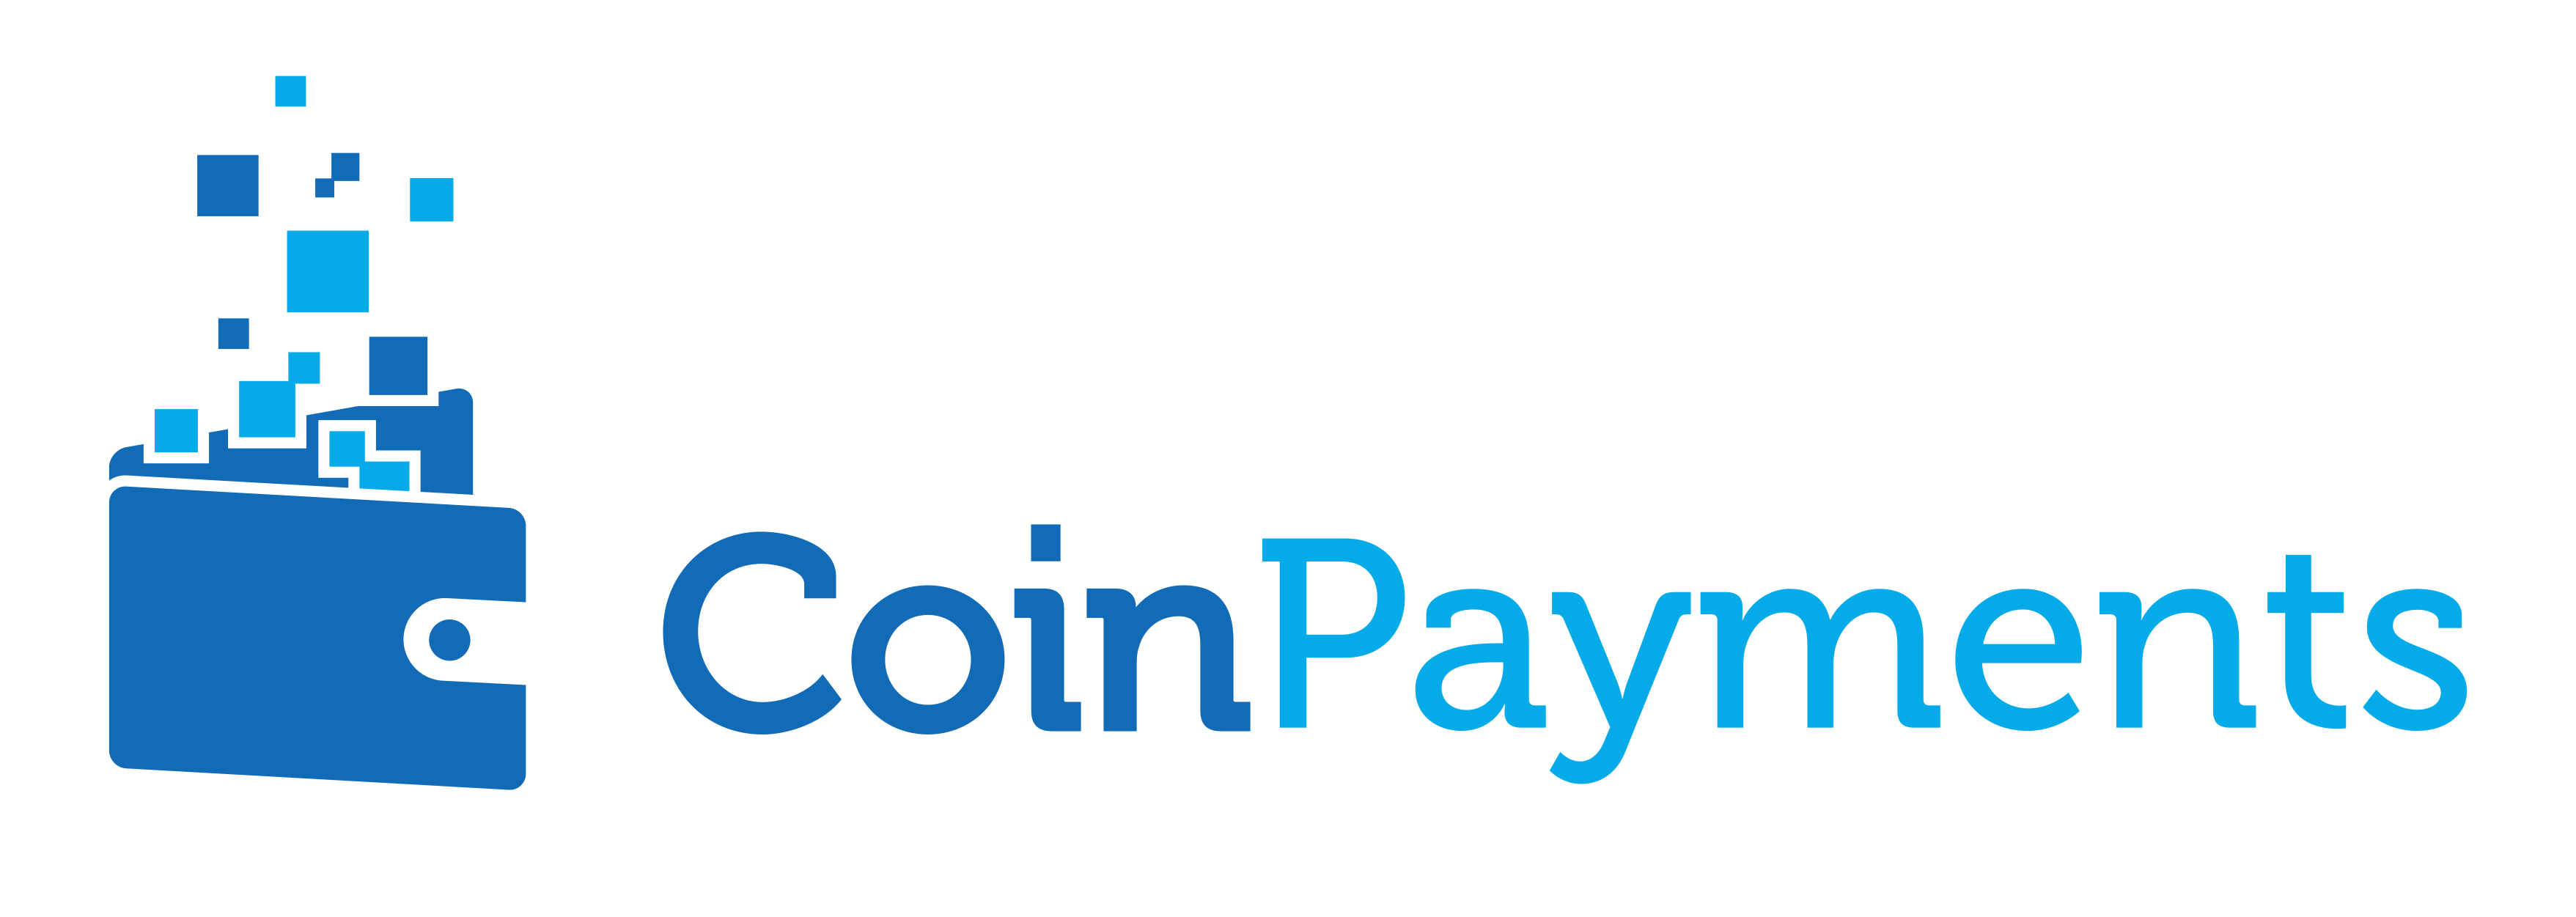 Coinpayments-lommeboklogo